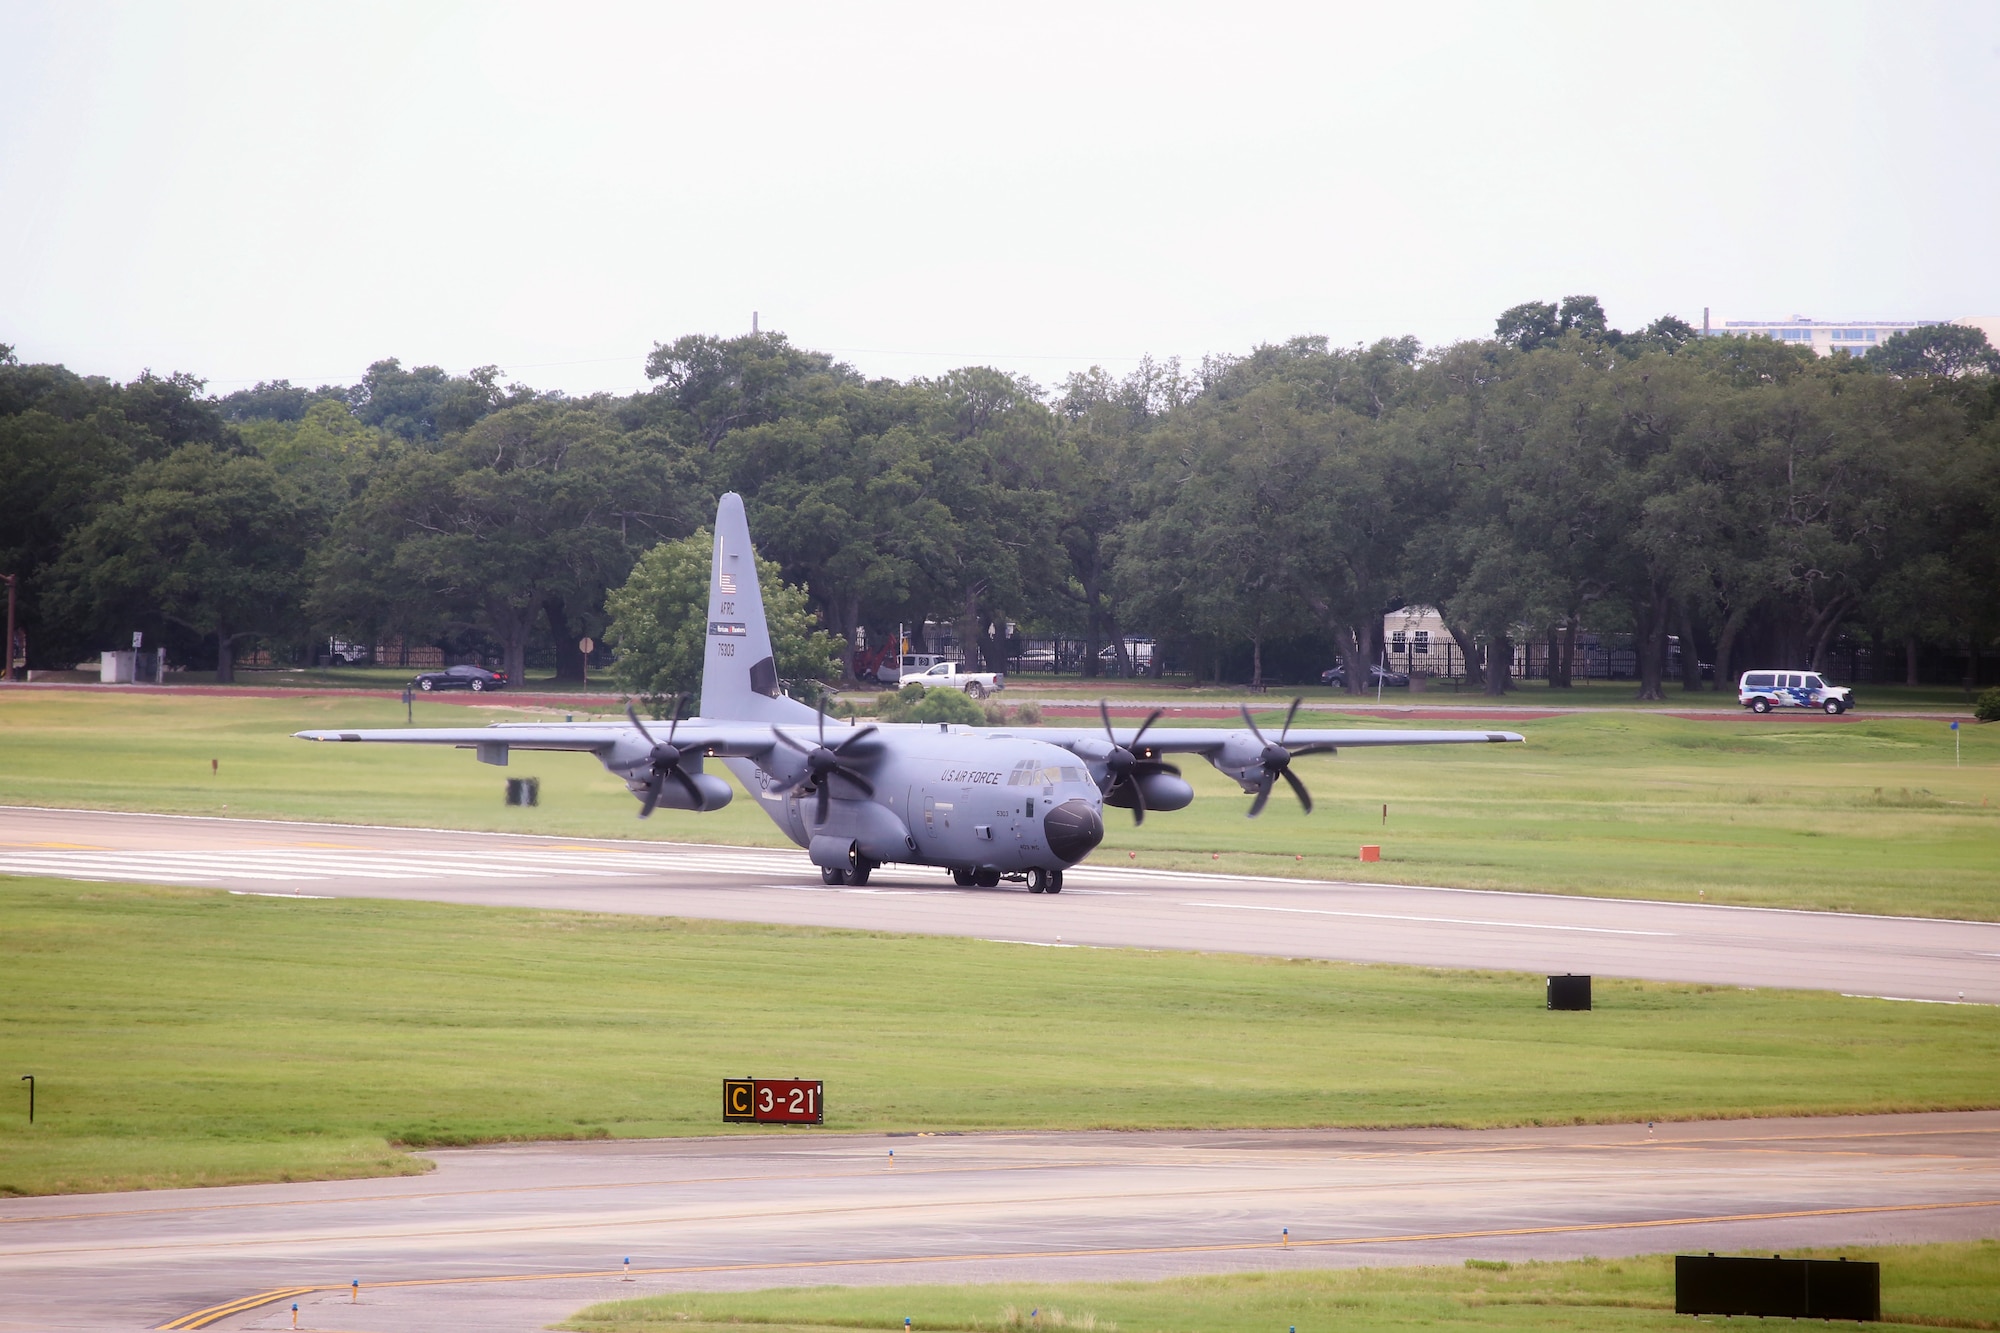 A WC-130J Super Hercules from the 53rd Weather Reconnaissance Squadron, aka Hurricane Hunters, begins to takeoff July 10, 2019 at Keesler Air Force Base, Mississippi. Tail number 75303 took off midday for an investigative flight into a tropical depression over the Gulf of Mexico. (Courtesy photo)